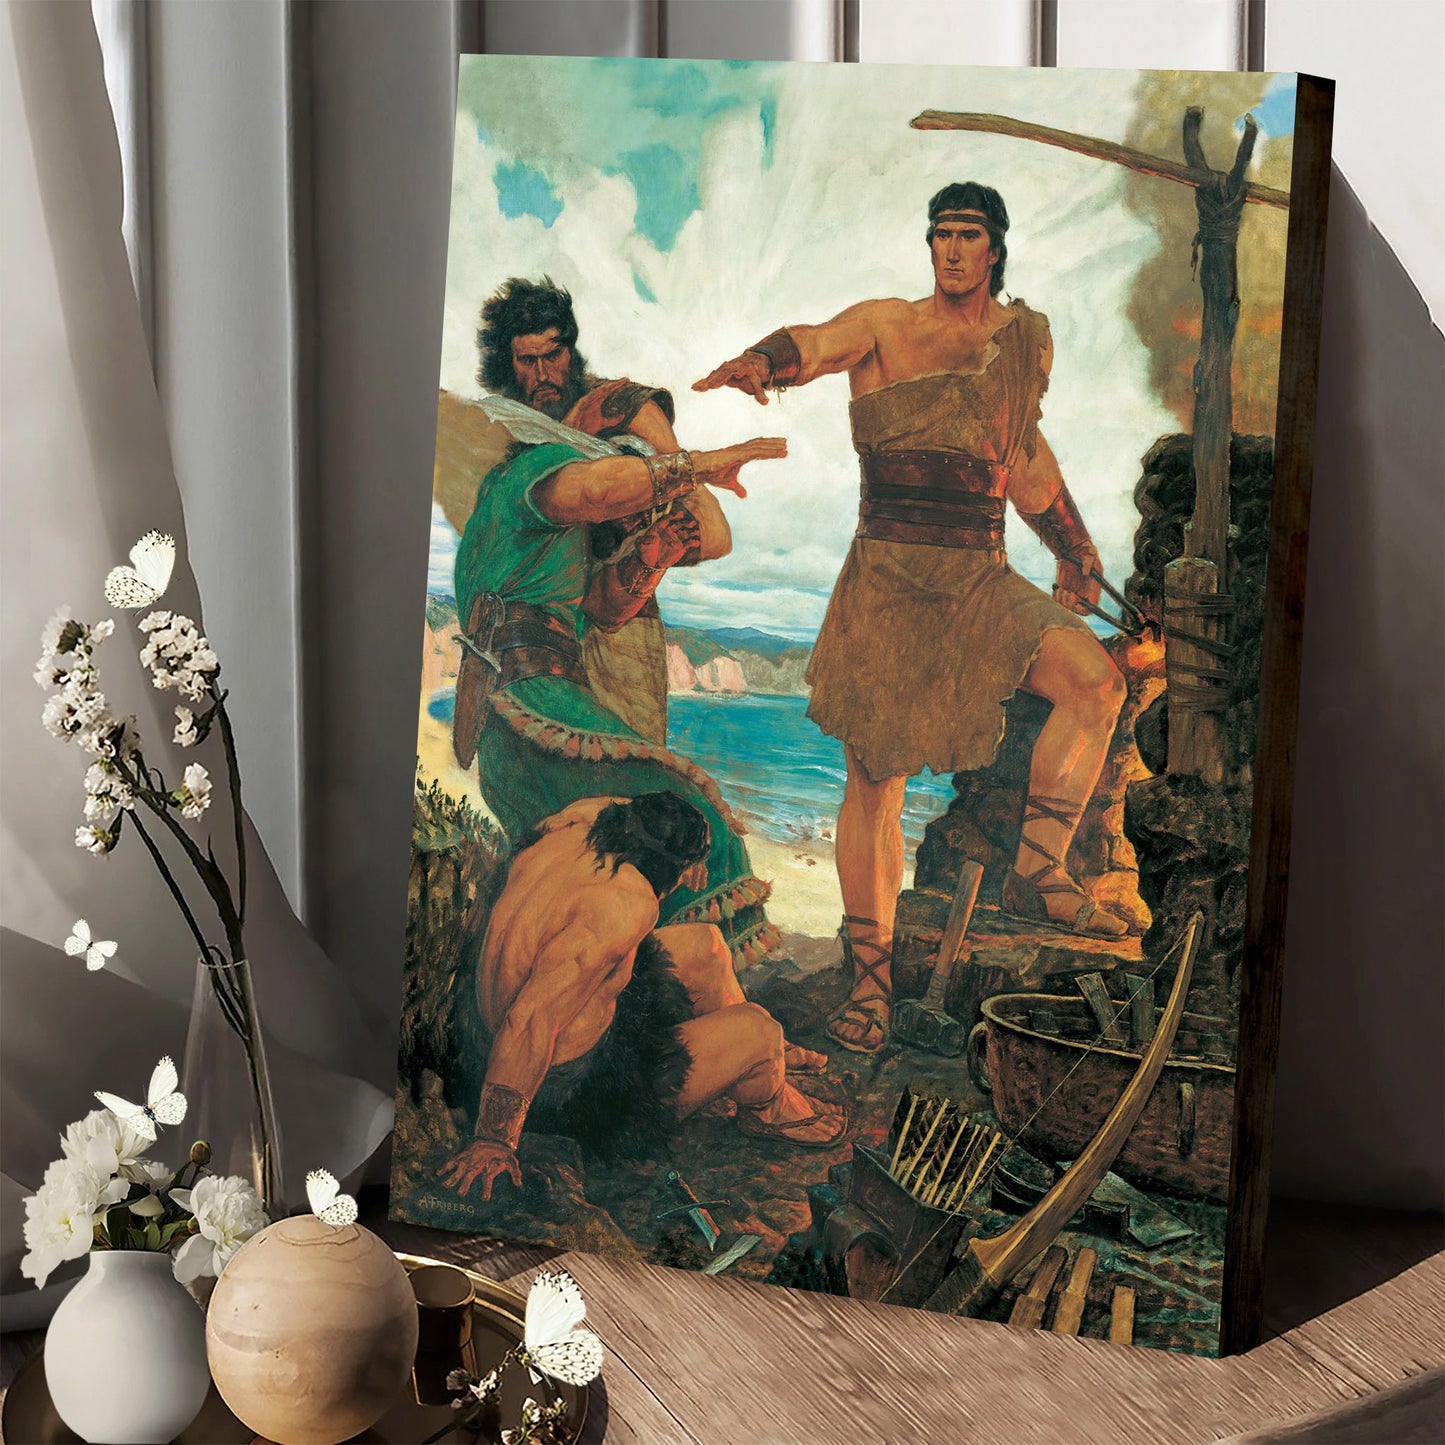 Nephi Subdues His Rebellious Brothers Canvas Pictures - Religious Canvas Wall Art - Scriptures Wall Decor